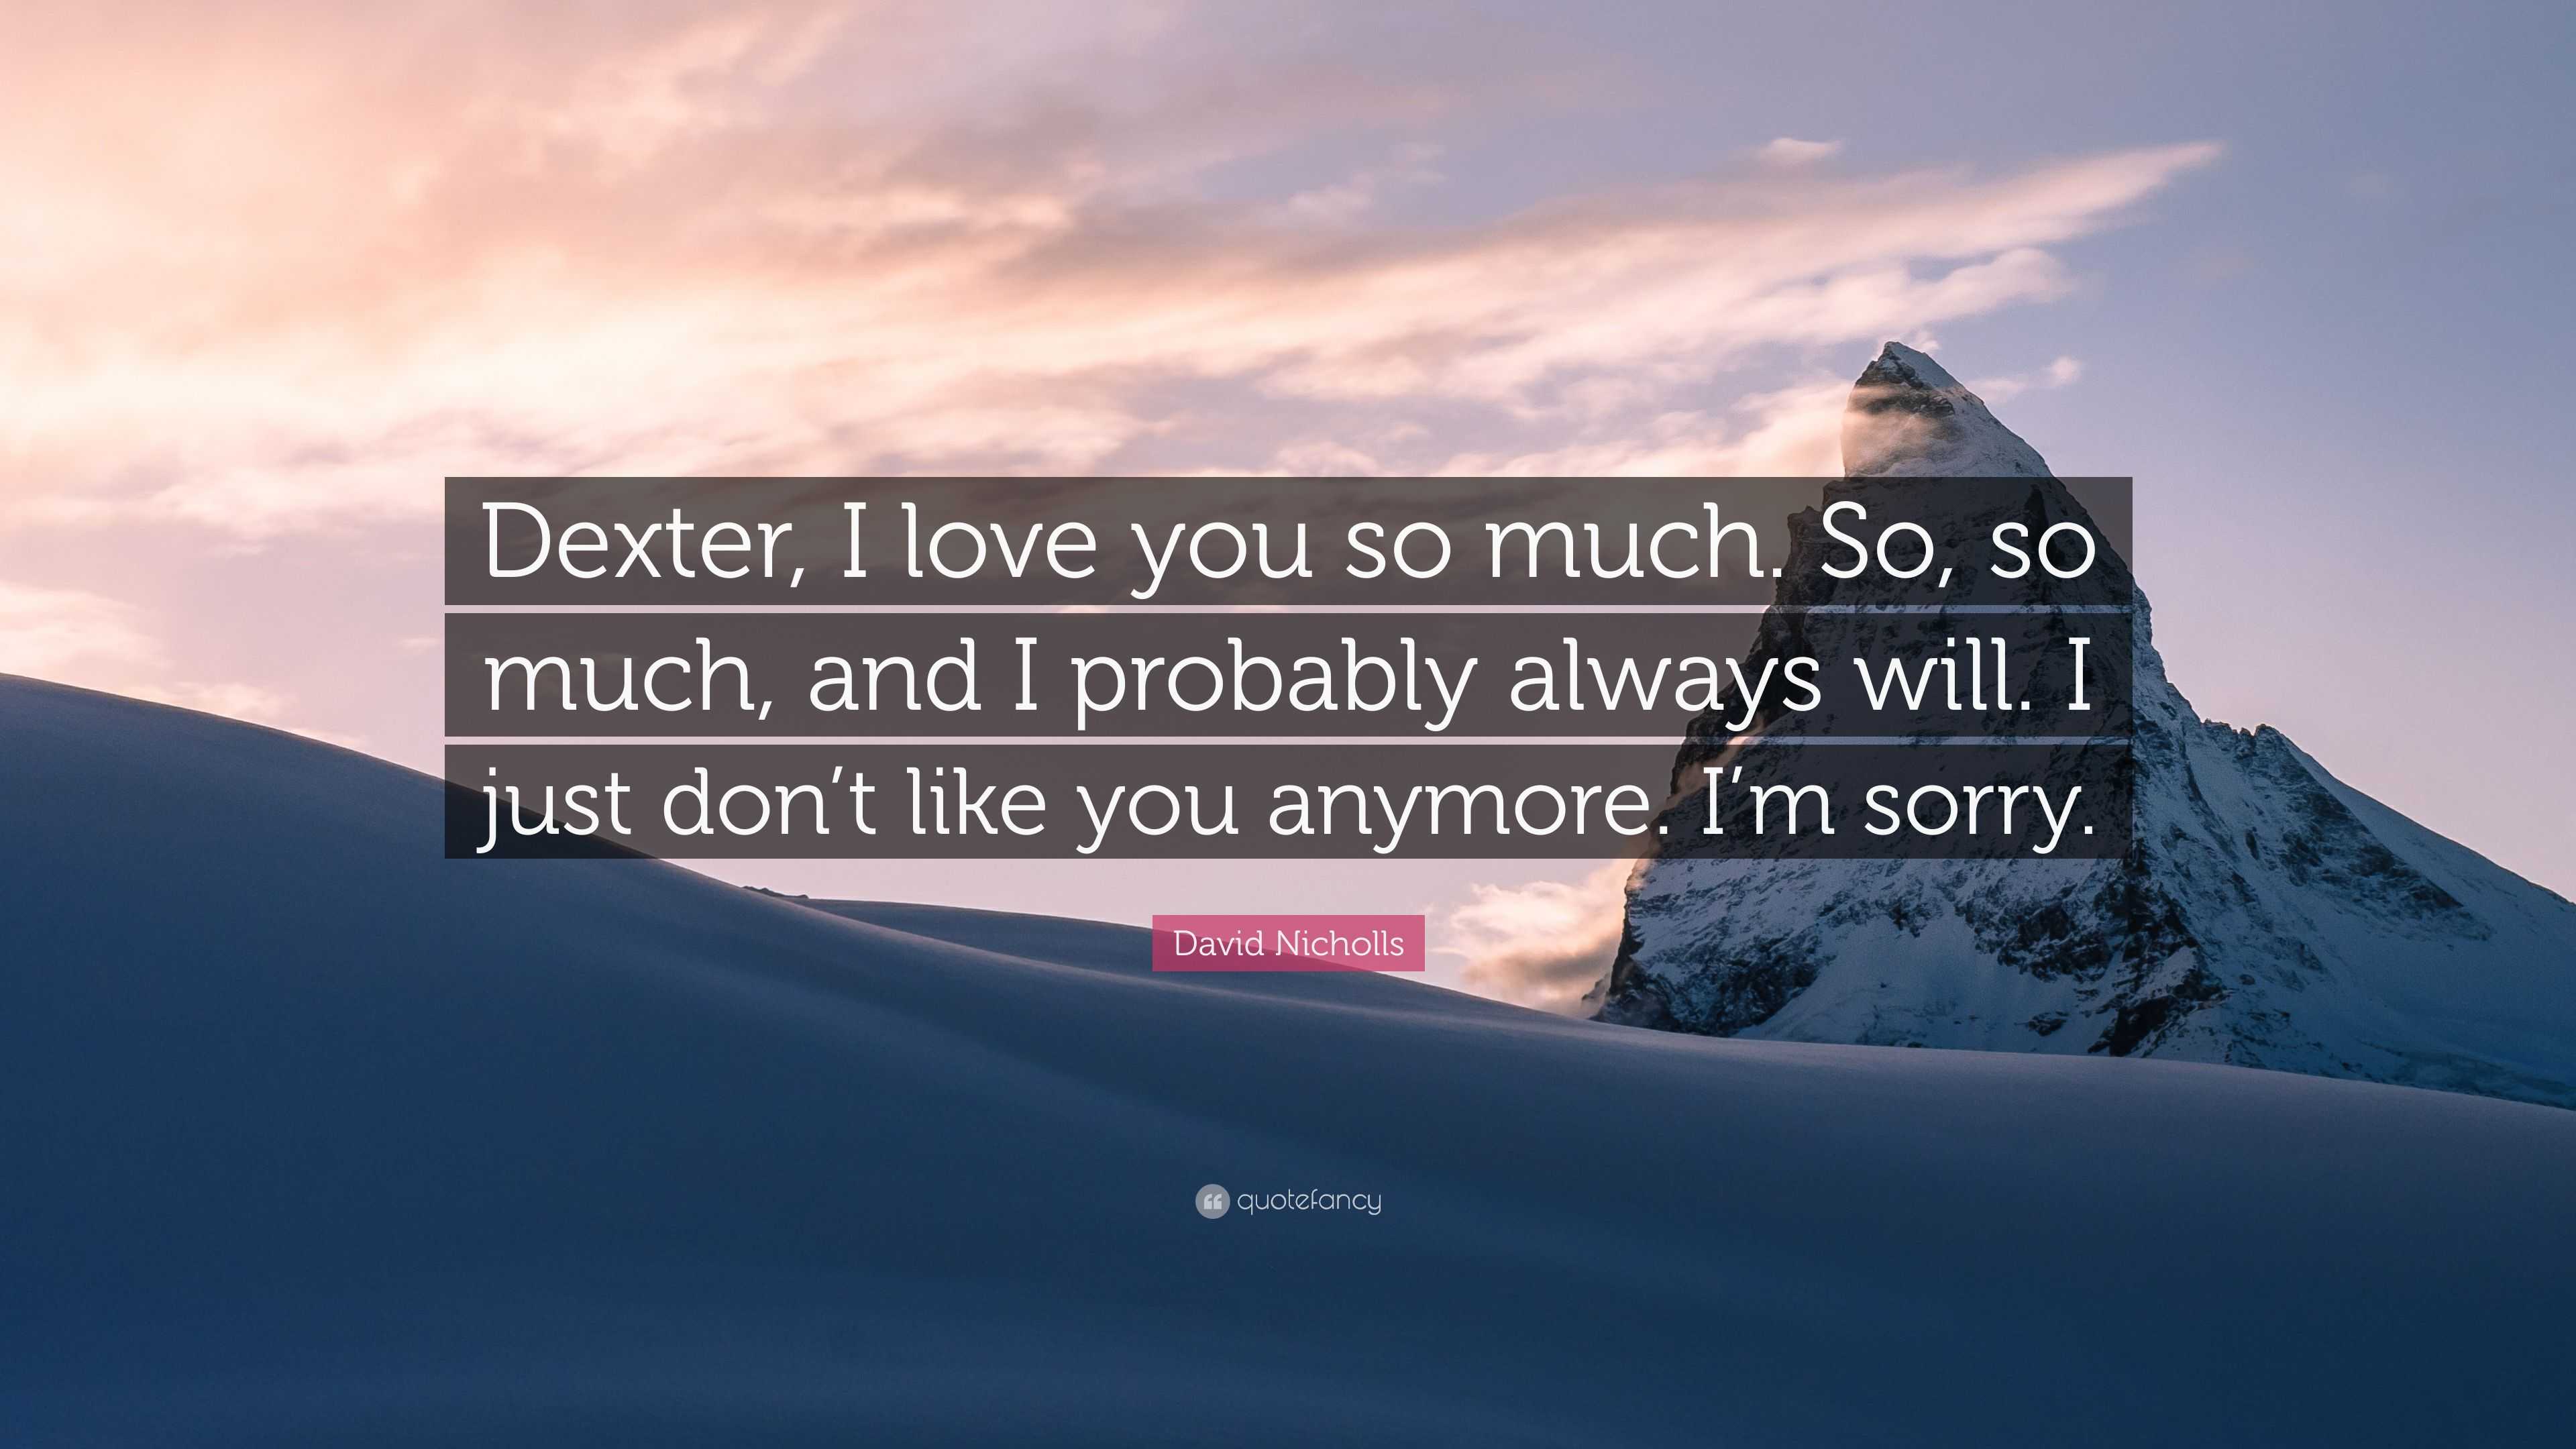 David Nicholls Quote “Dexter I love you so much So so